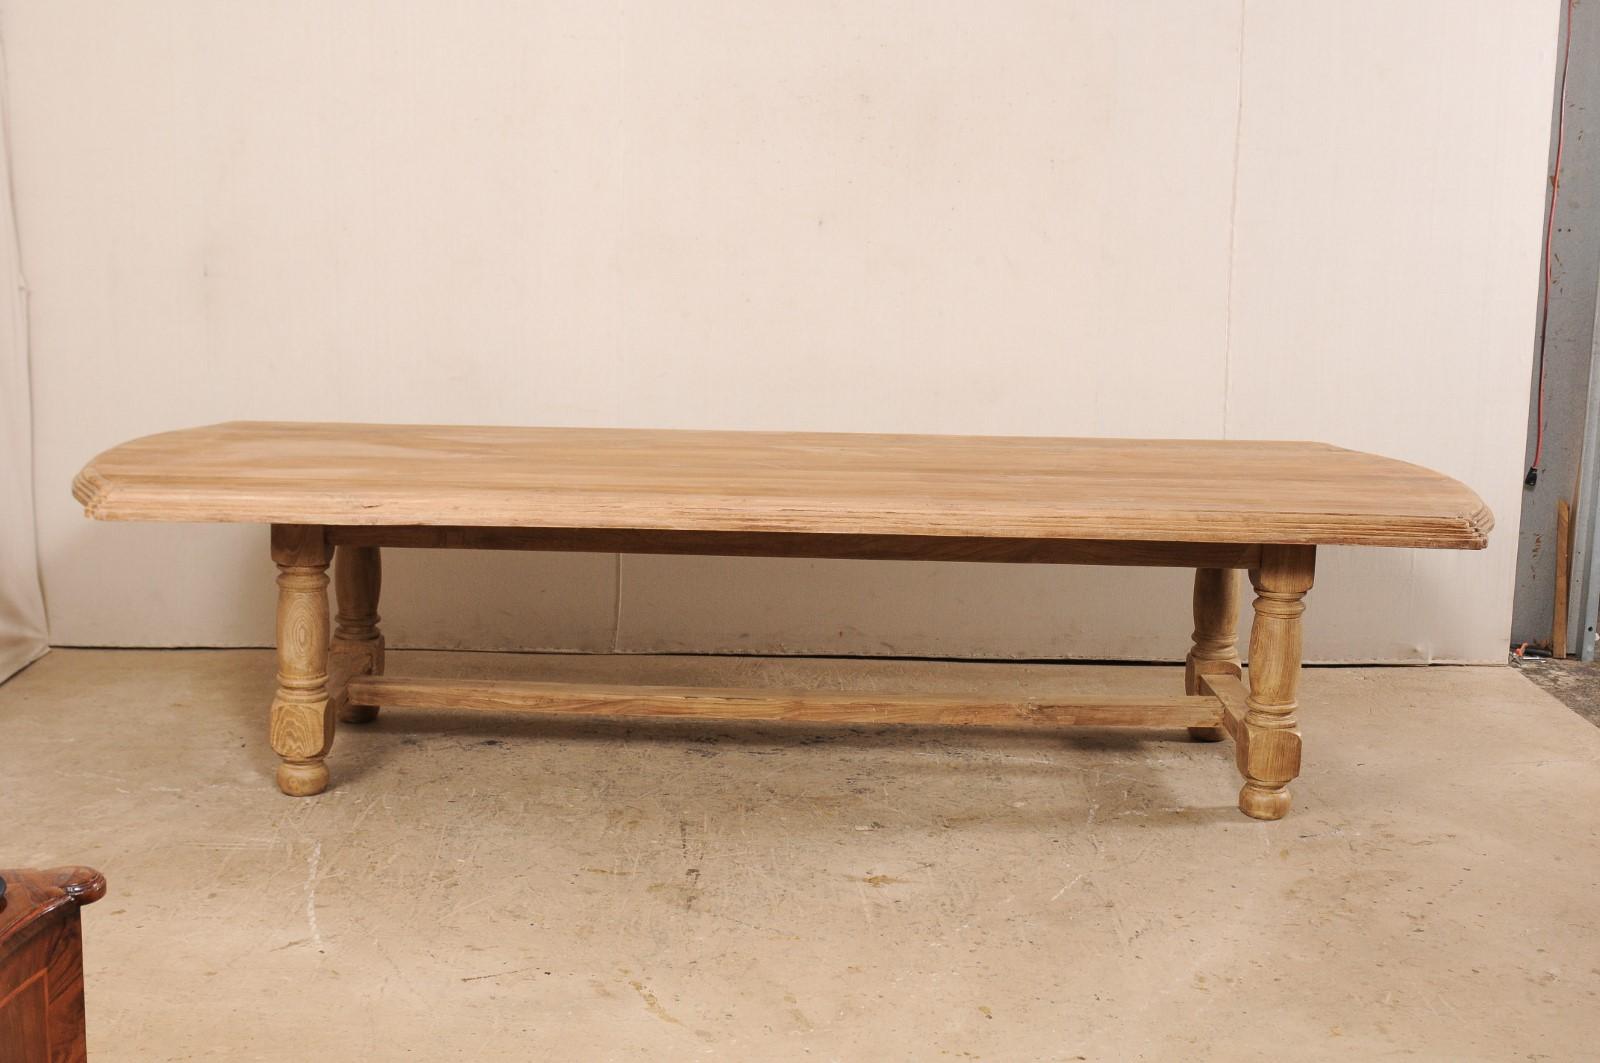 11 foot dining table